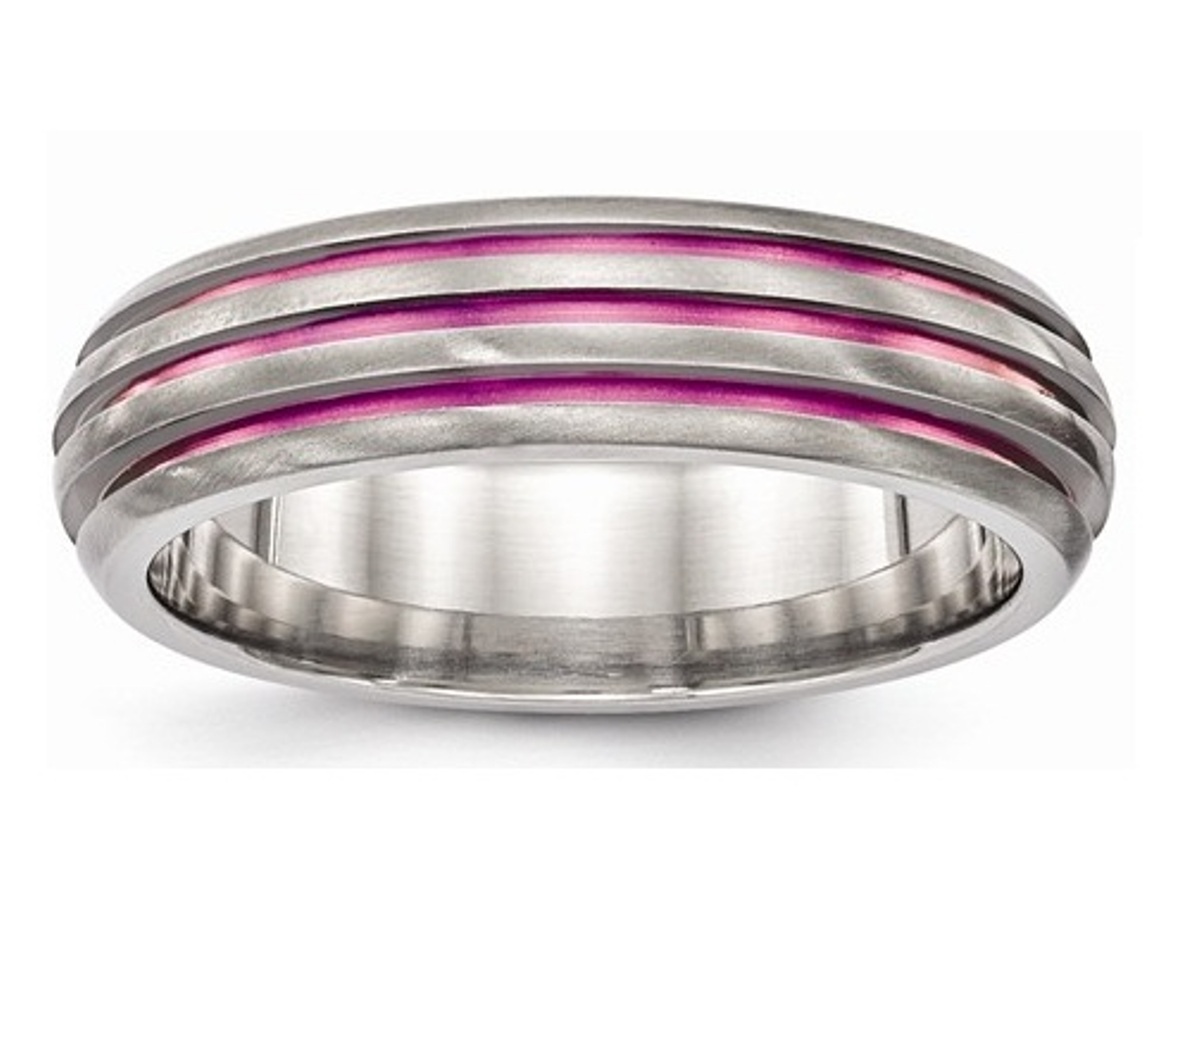  Titanium Triple Groove Pink Anodized Ring